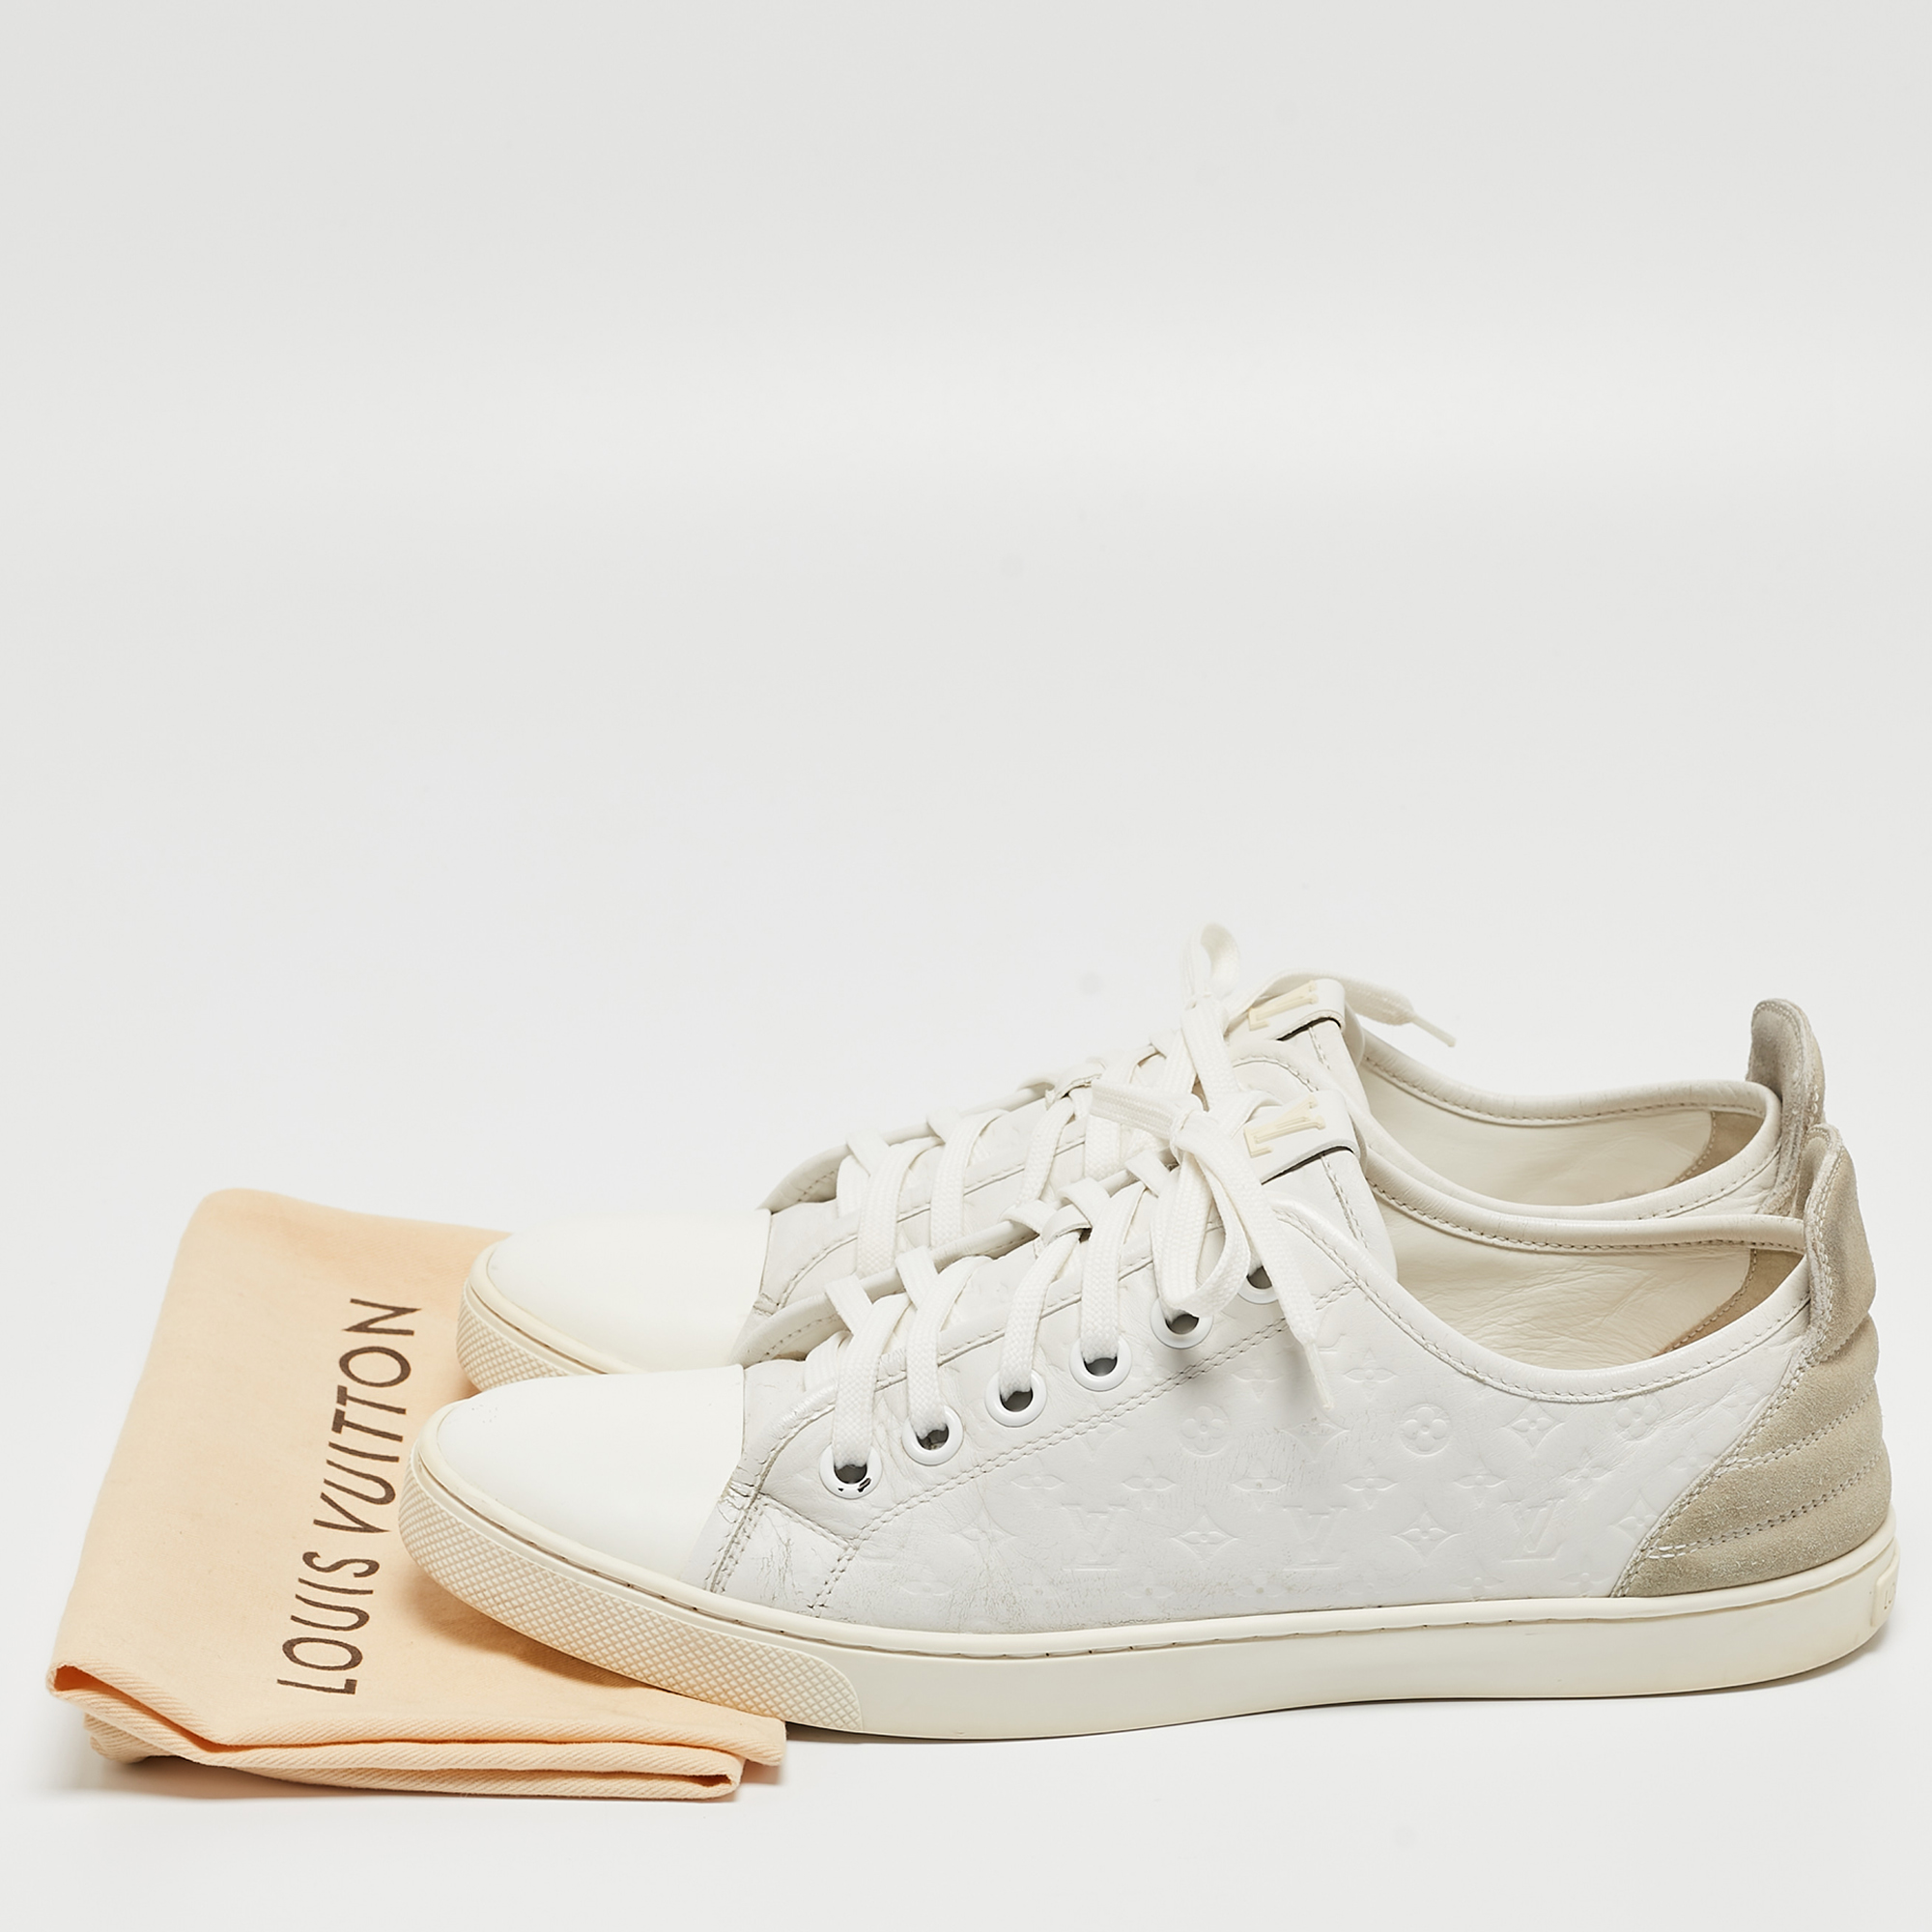 Louis Vuitton White Monogram Embossed Leather Punchy Low Top Sneakers Size 40